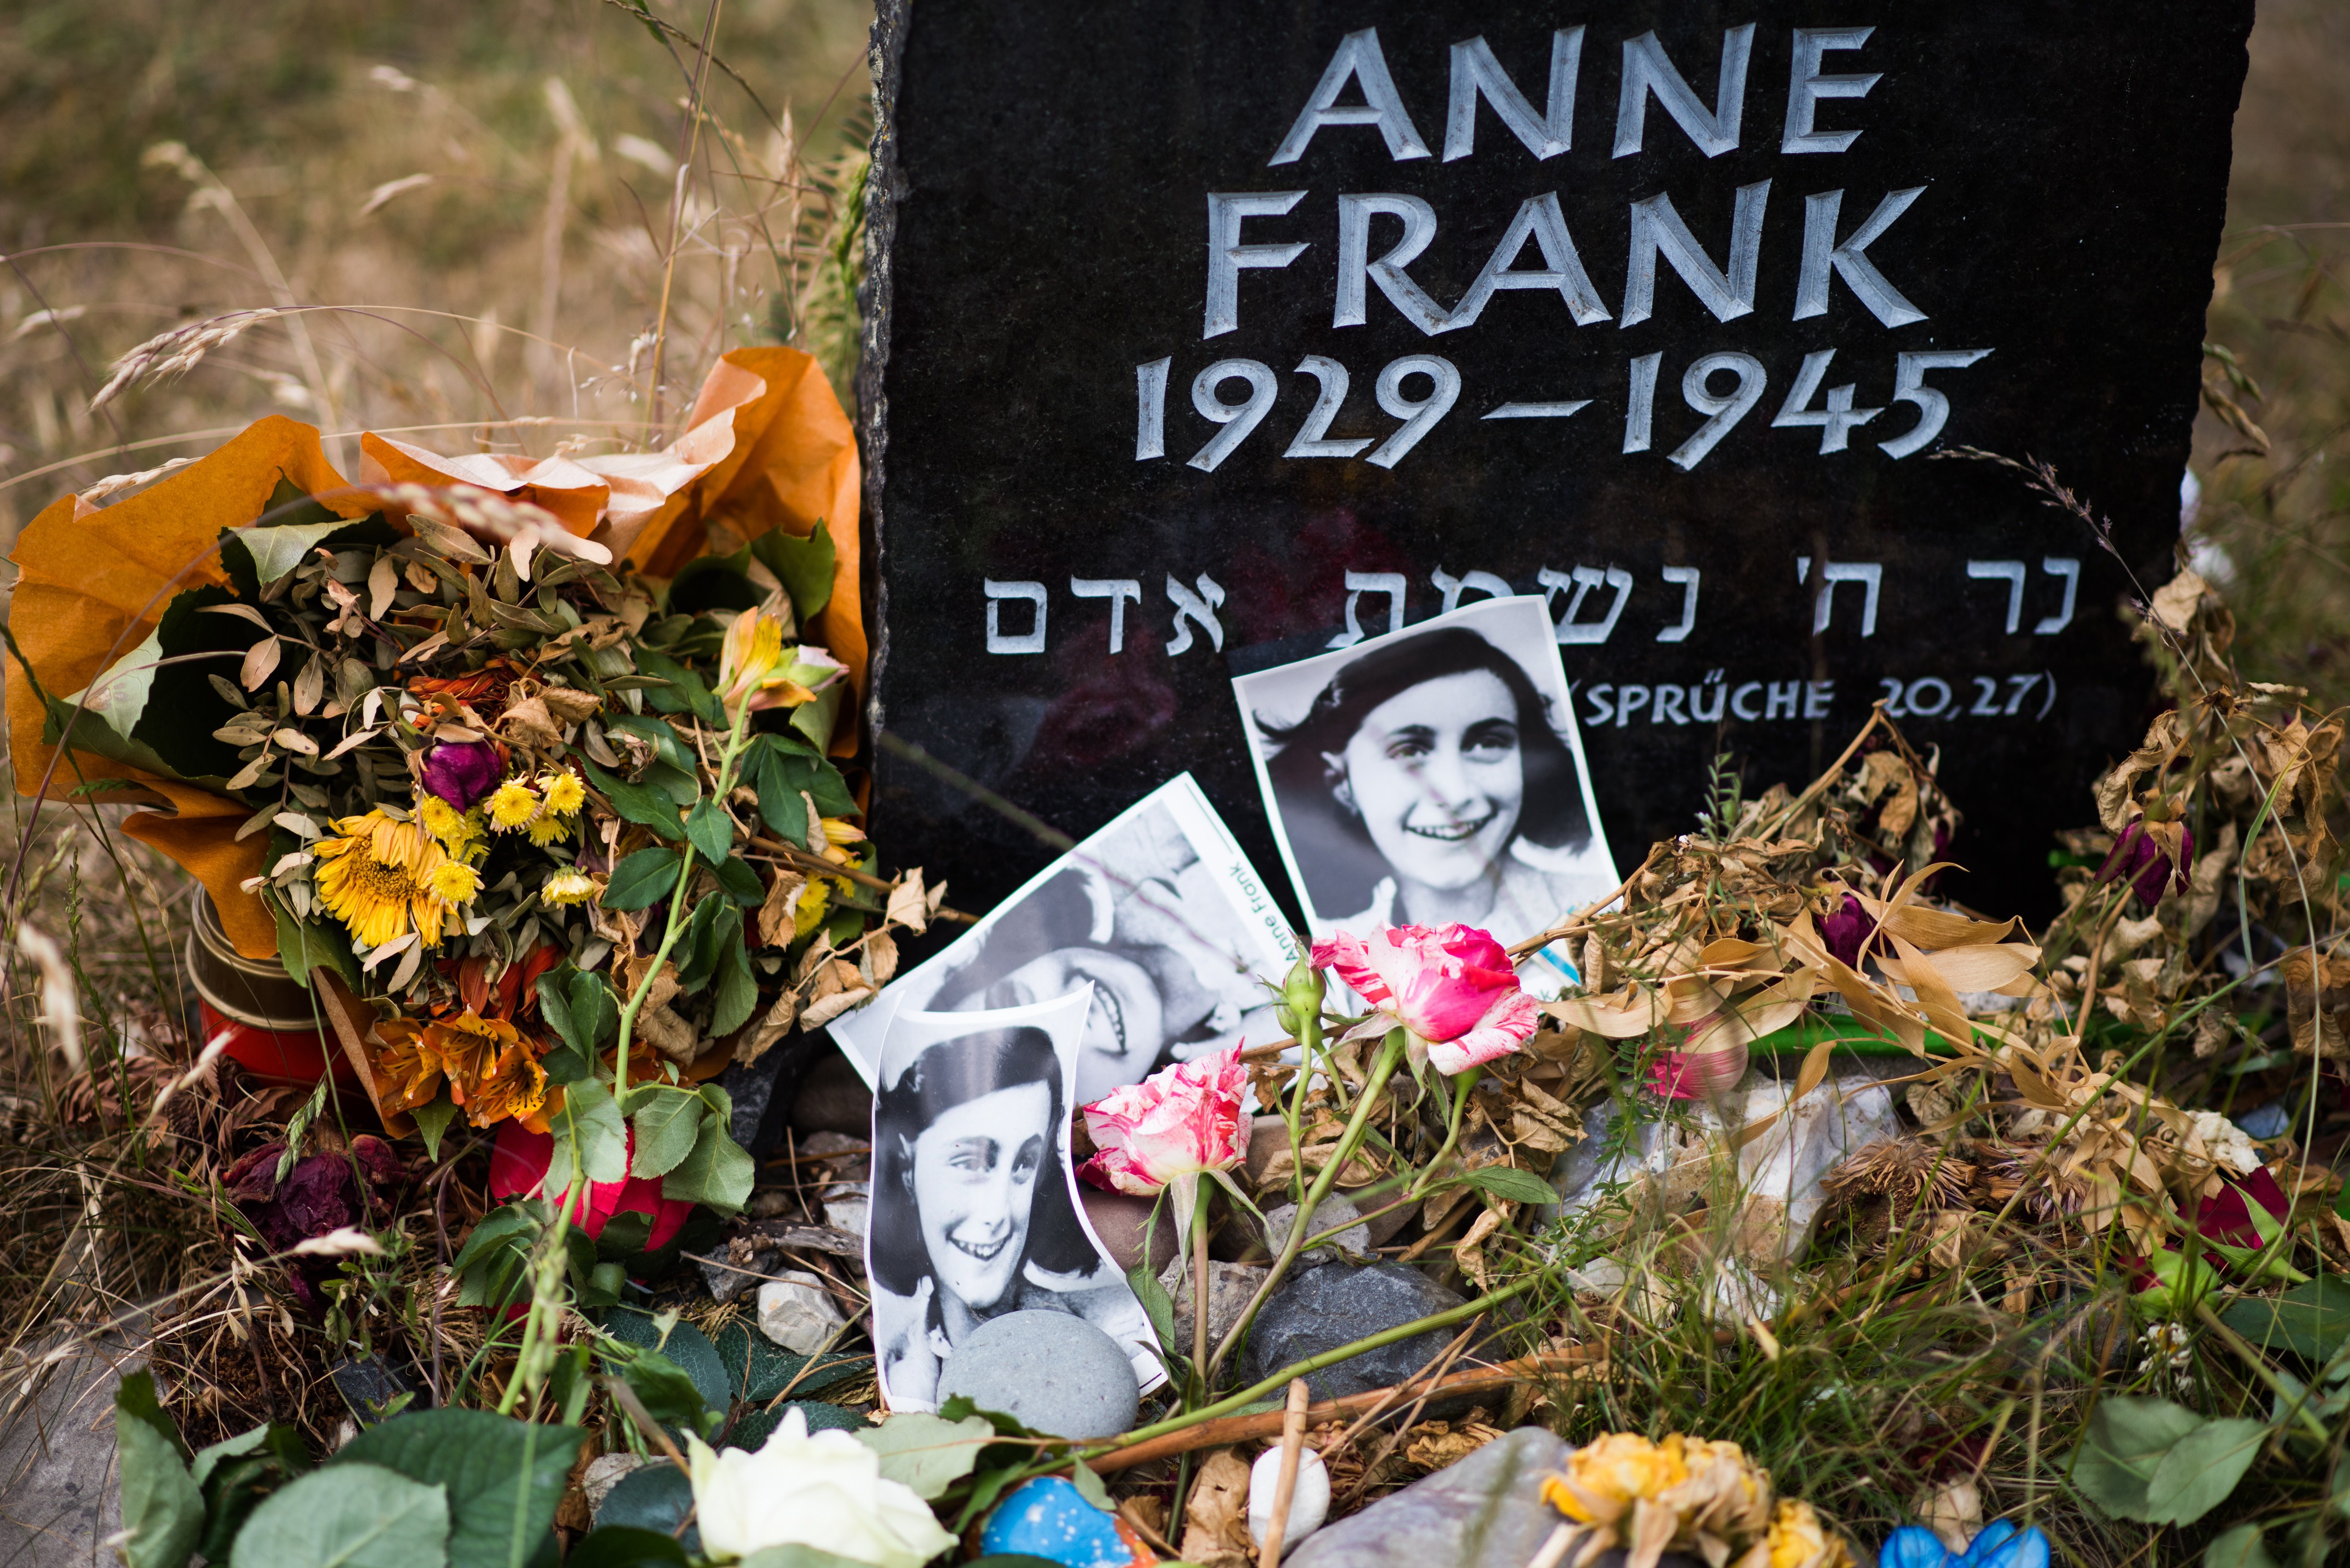 A memorial stone for Anne Frank at the Bergen-Belsen concentration camp. 